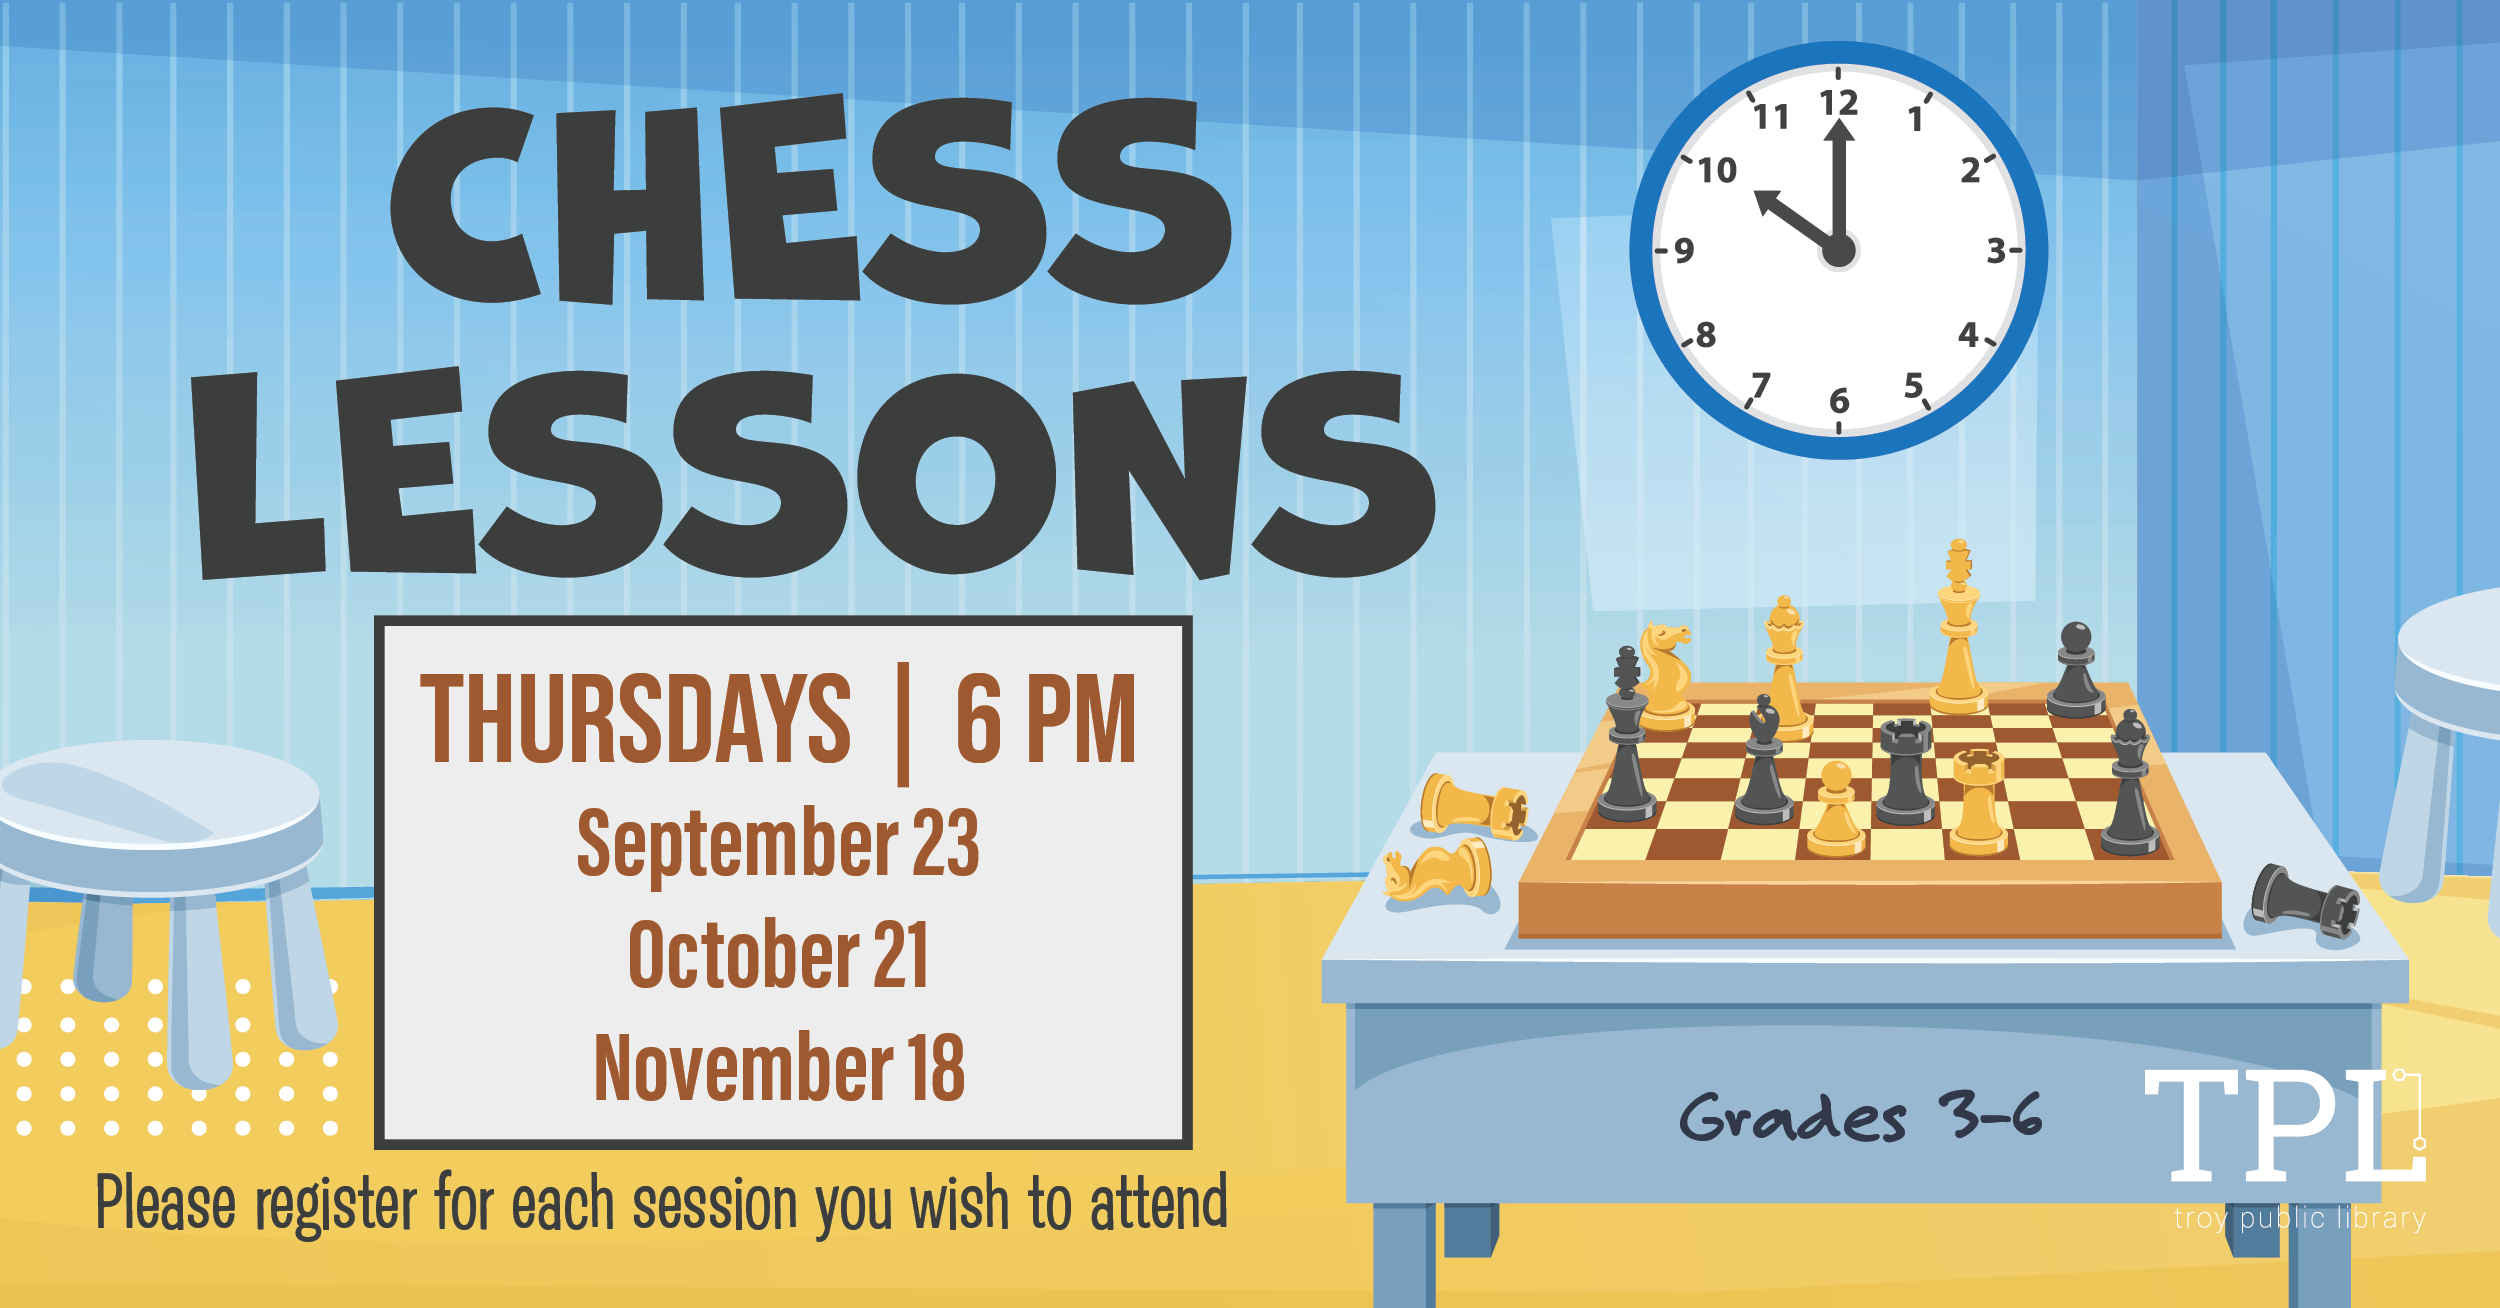 Chess Lessons Thursdays at 6pm for grades 3-6. September 23, October 21, November 18. Please register for each session you wish to attend. 